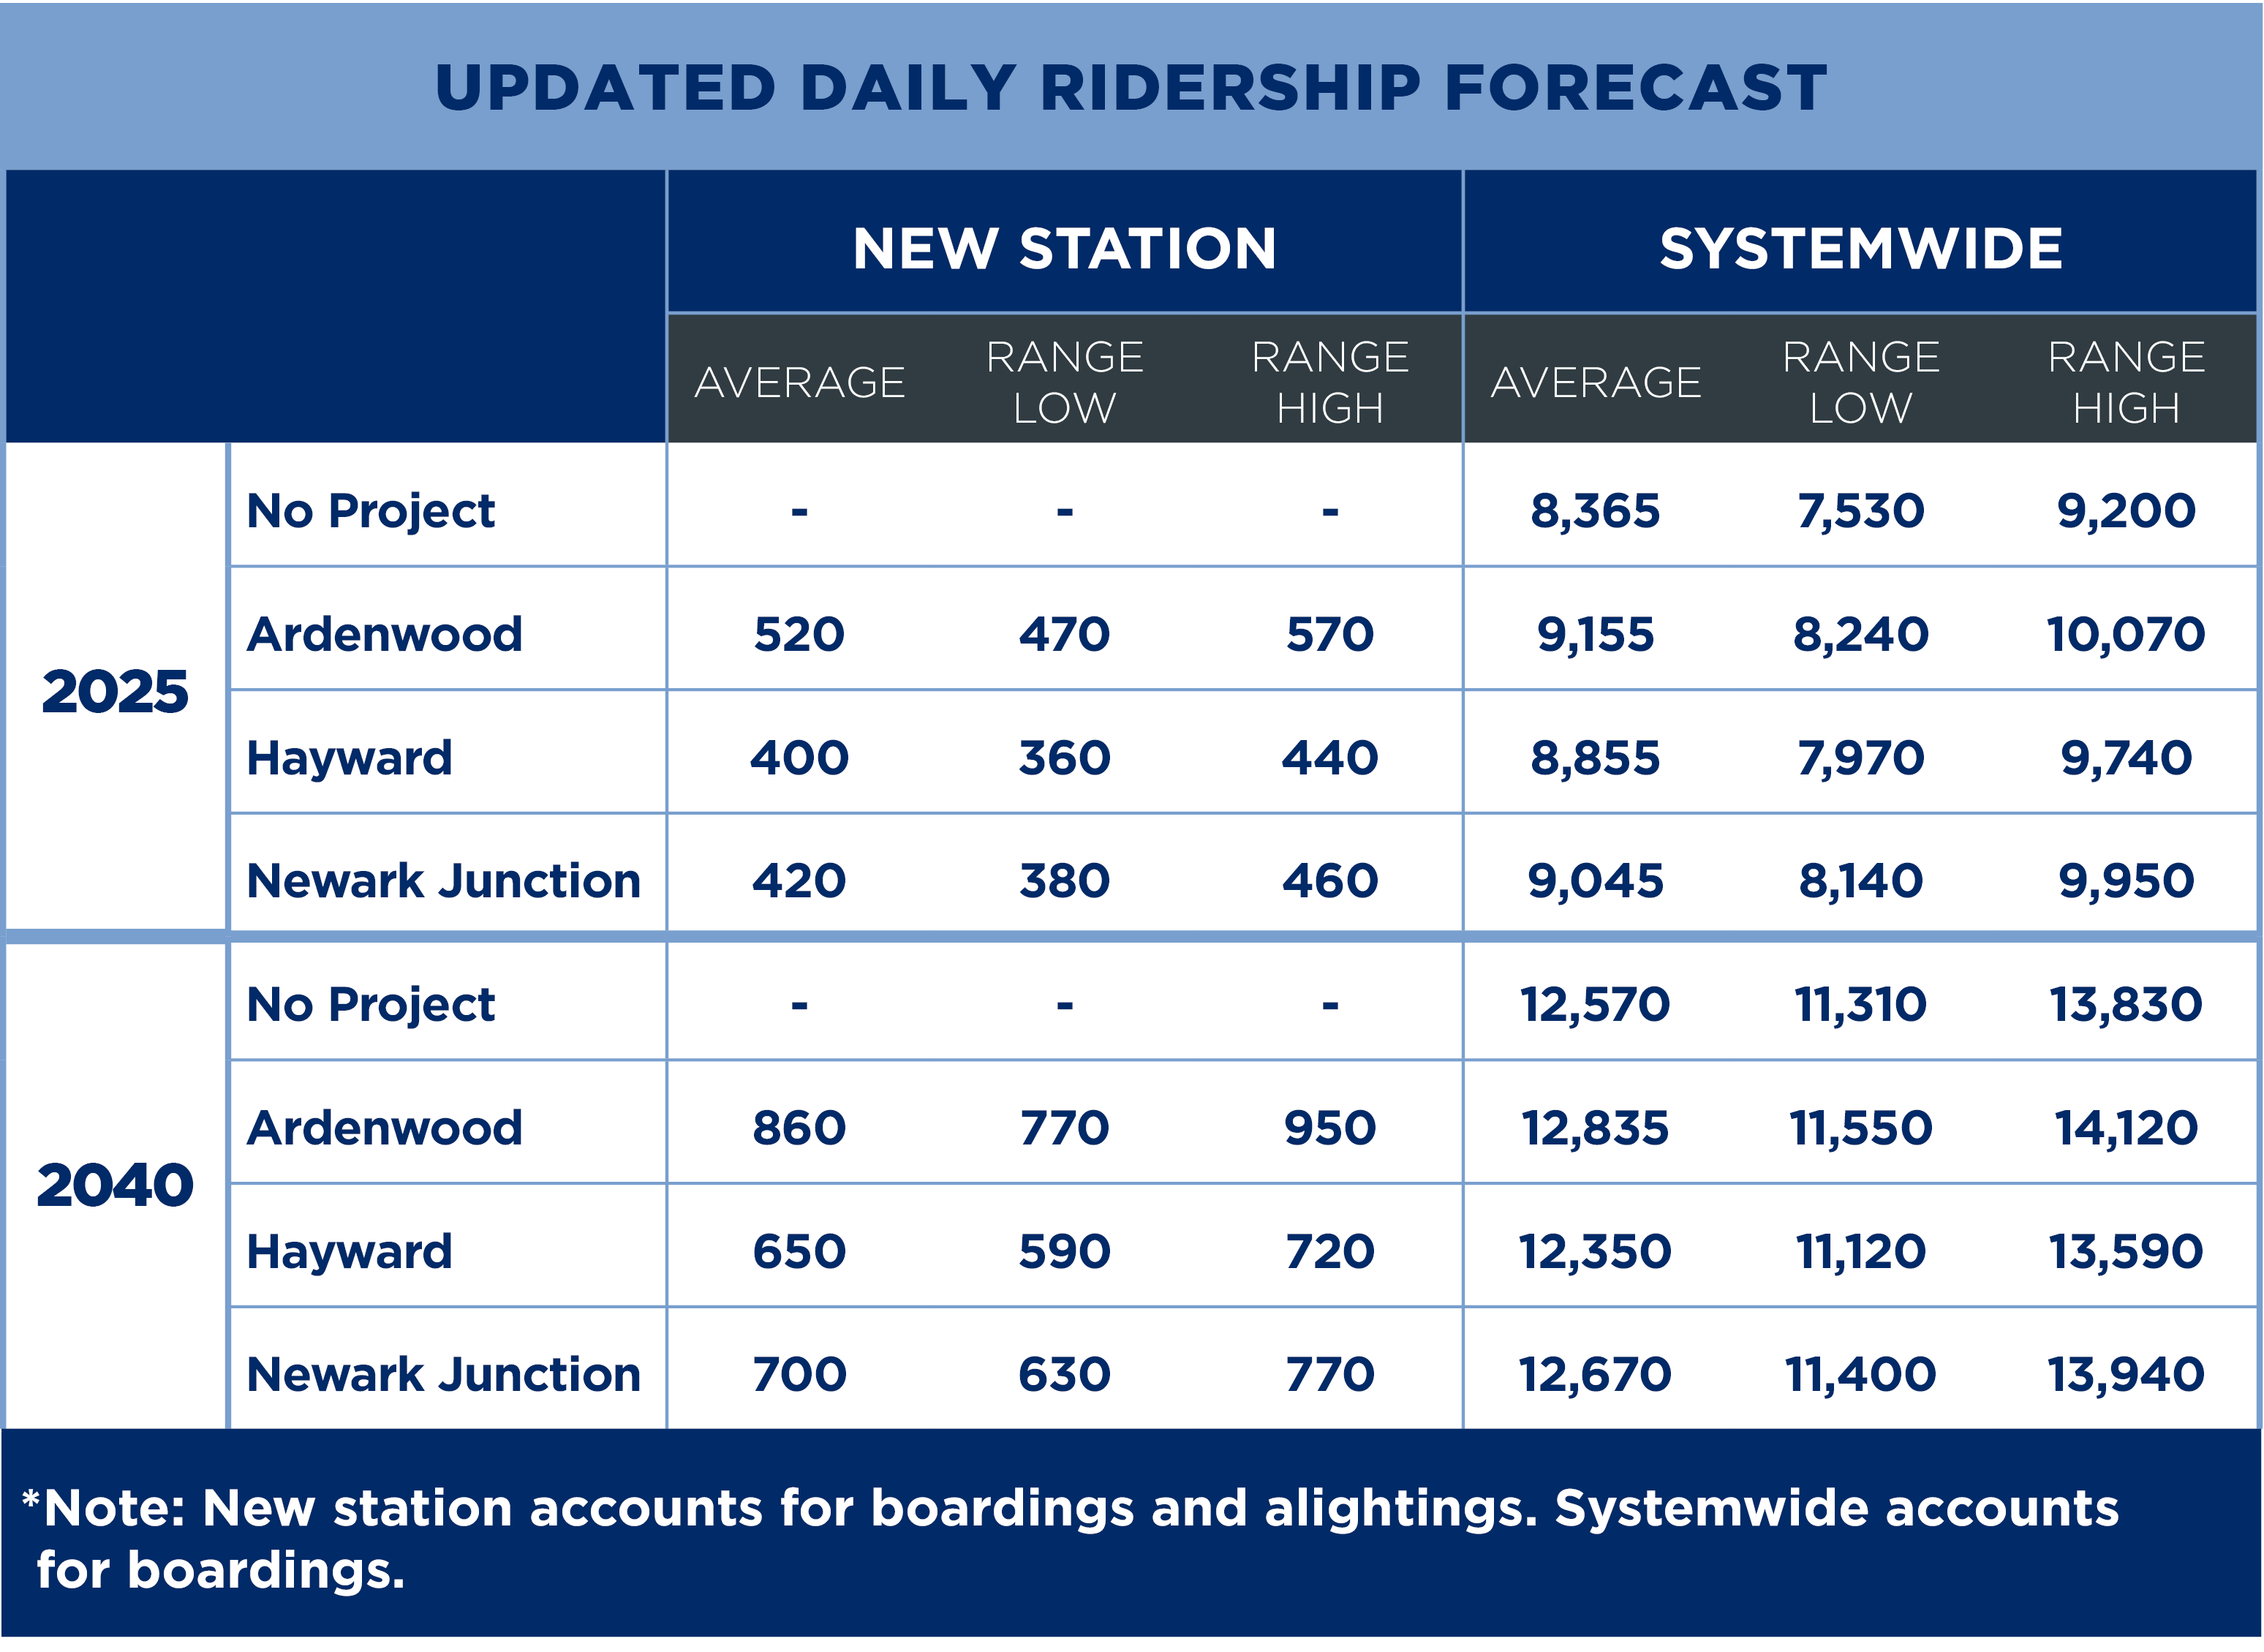 Table showing updated daily ridership forecast